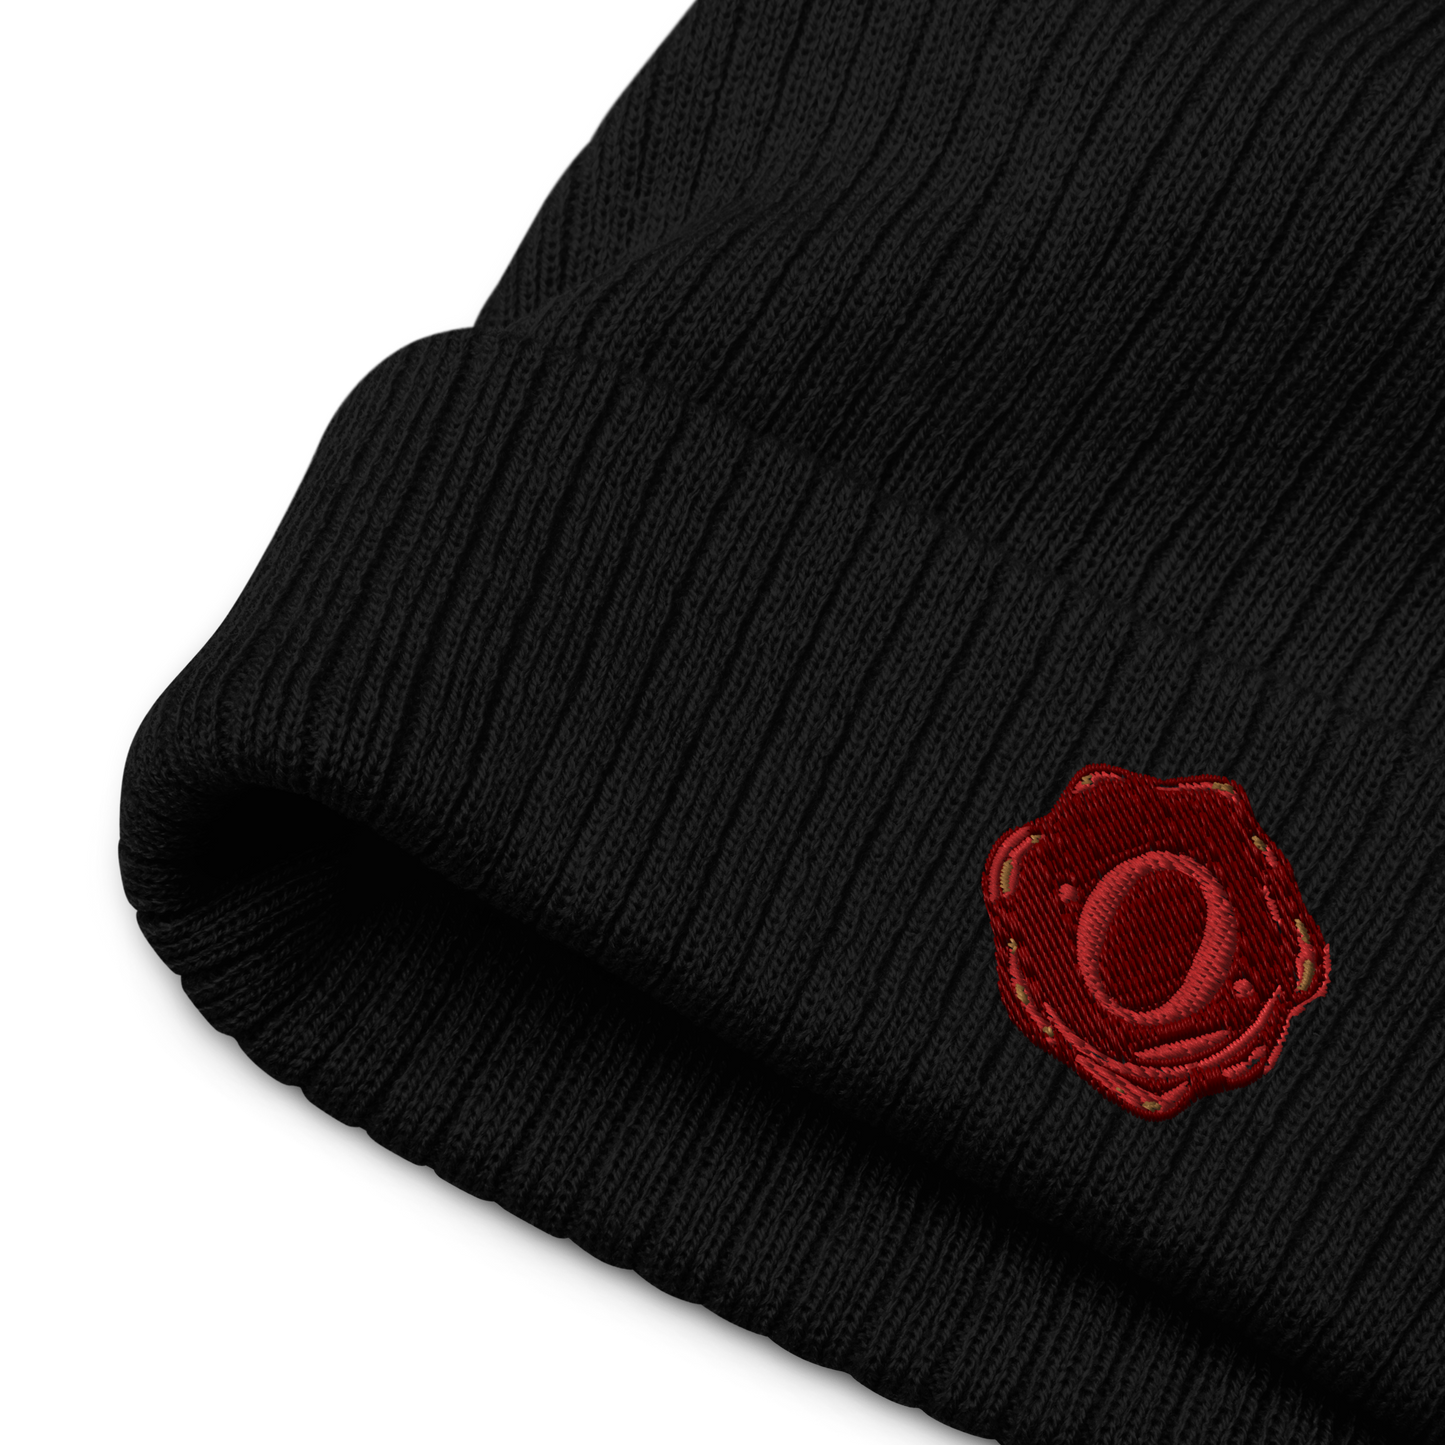 Ribbed Knit Seal Beanie